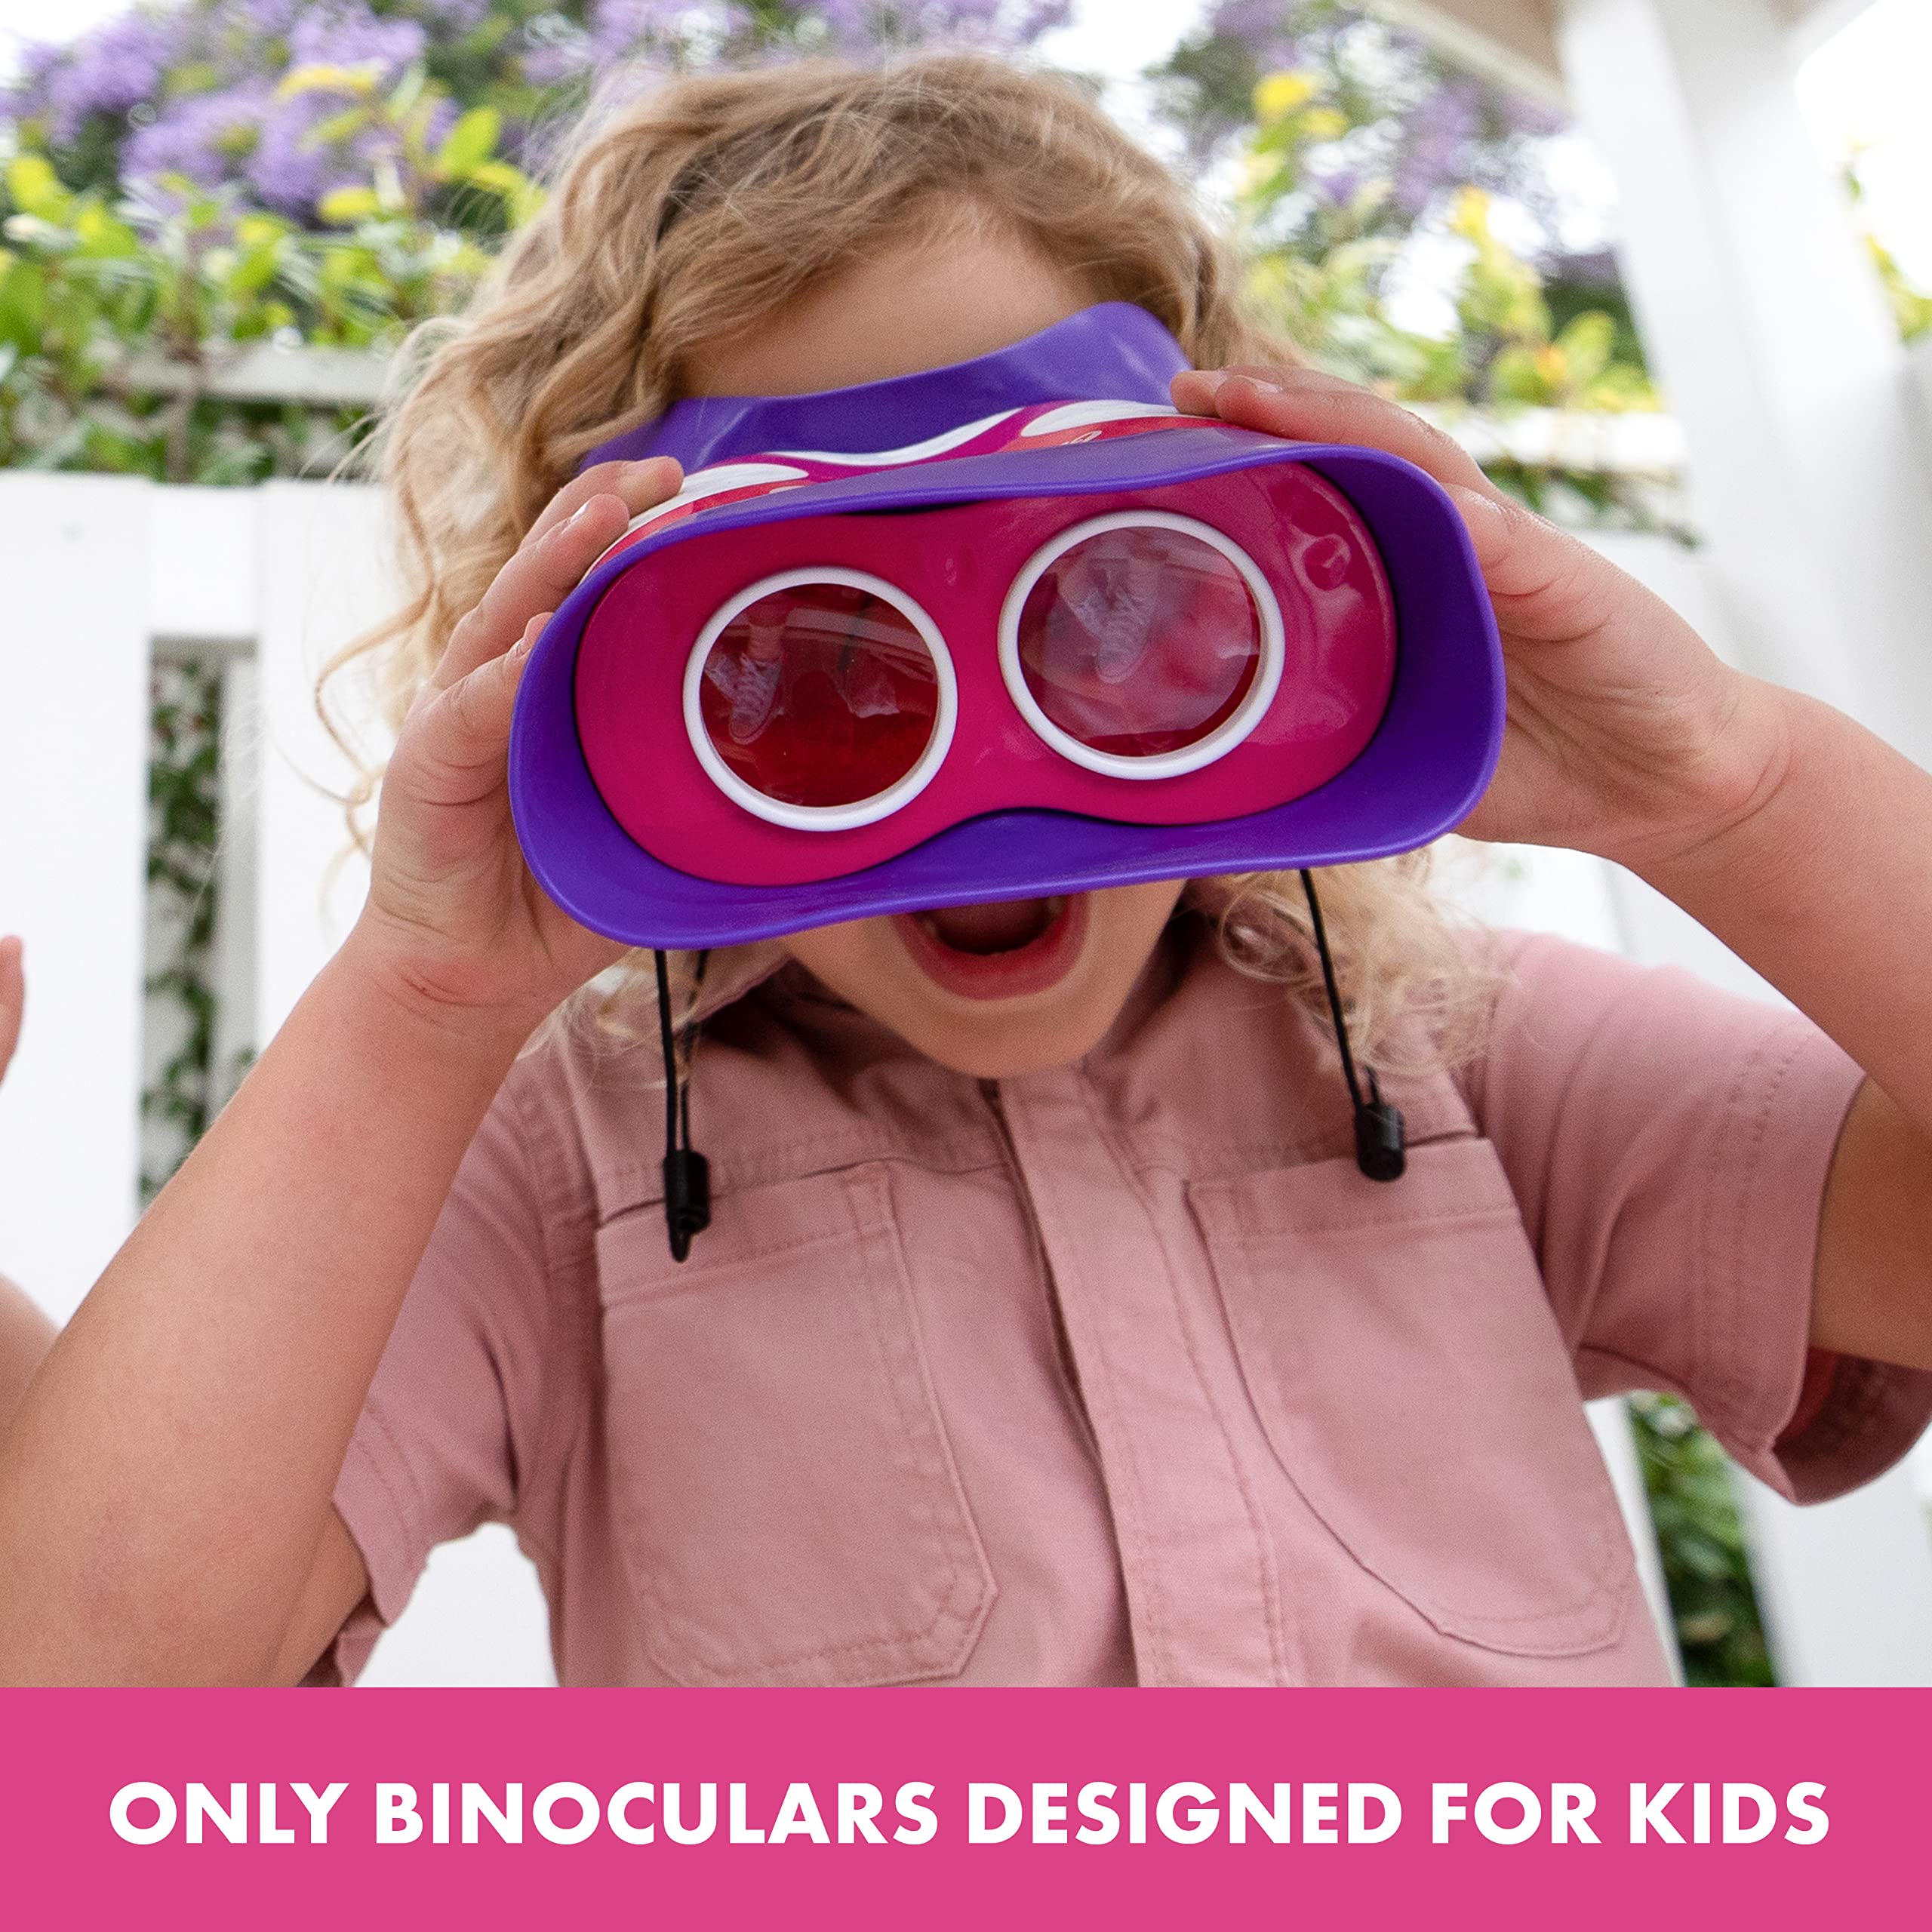 Educational Insights GeoSafari Jr. Kidnoculars Pink Binoculars For Toddlers & Kids, Gift for Toddlers Ages 3+